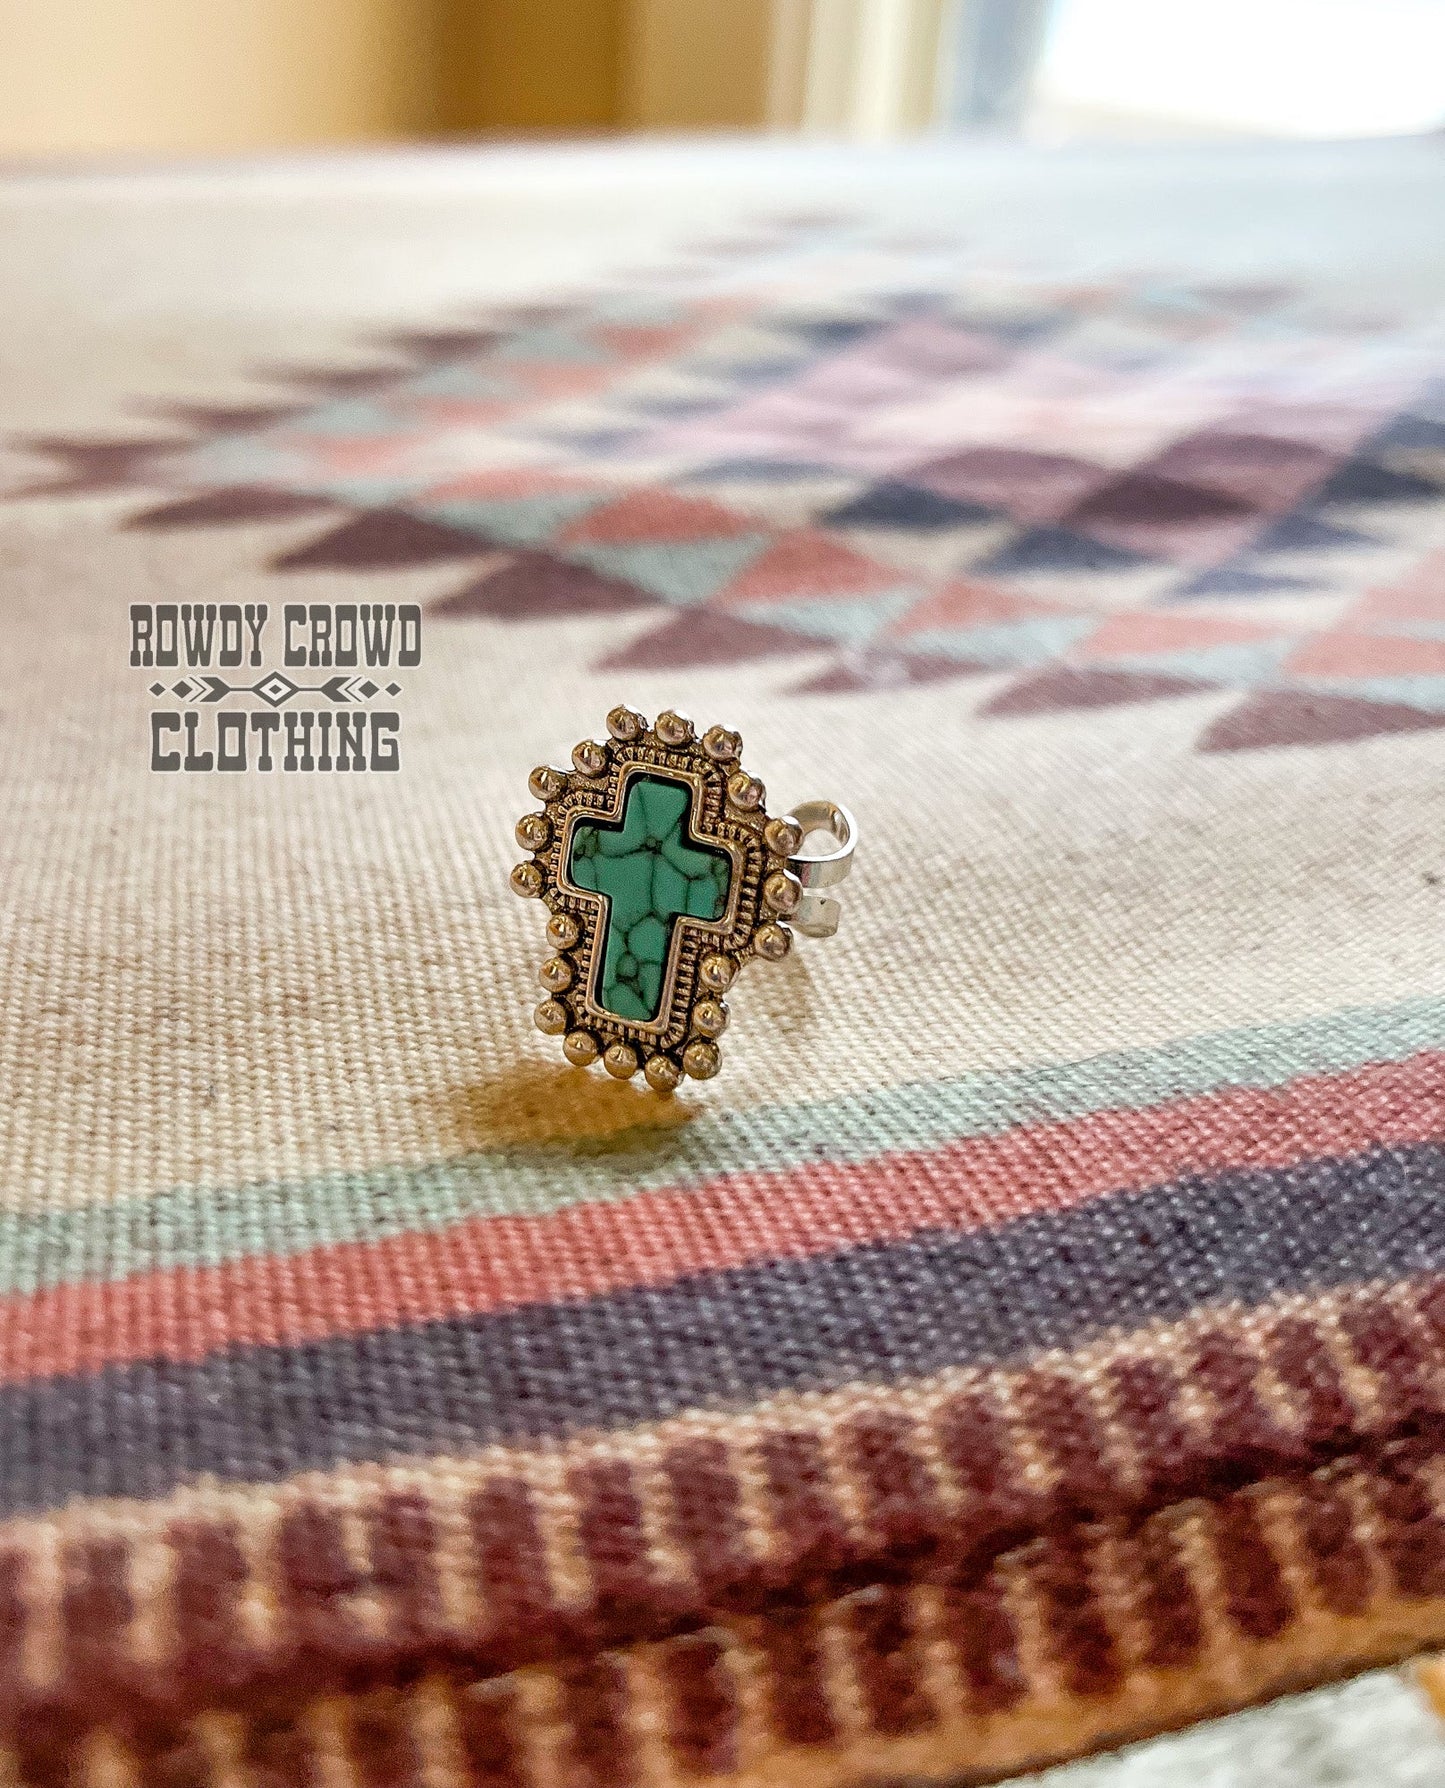  Western Accessories, Western Jewelry, Southwestern Jewelry, Western Jewelry Wholesale, Cowgirl Jewelry, Western Wholesale, Wholesale Accessories, Wholesale Jewelry, Wild rag scarf slide, cowboy scarf slides, turquoise scarf slides, western scarf slides, scarf rings and slides